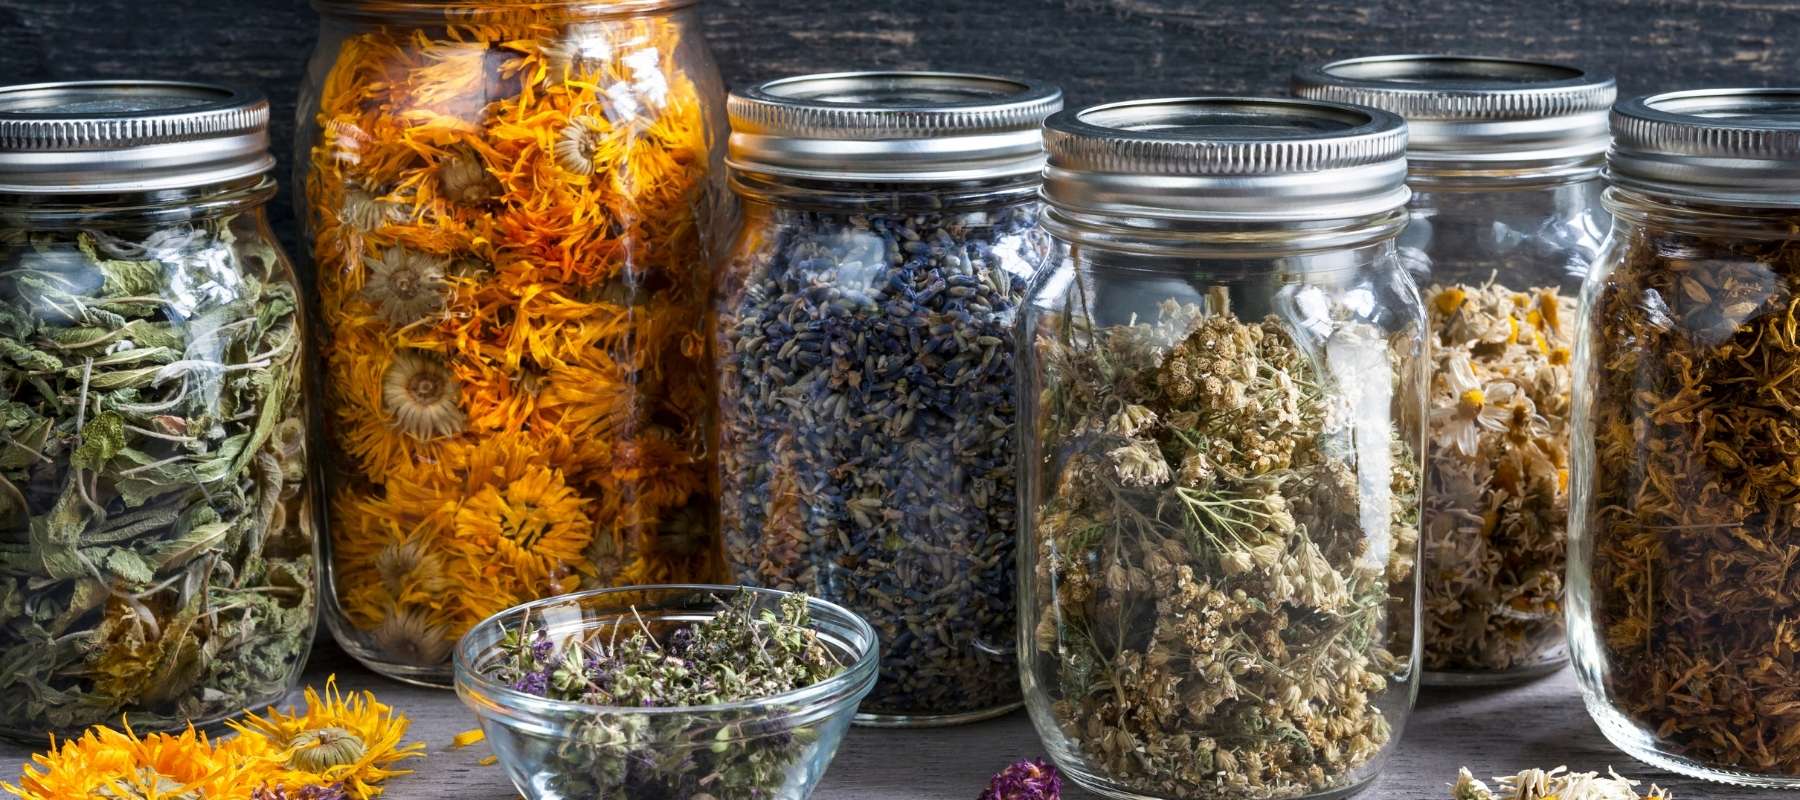 How to dry and preserve herbs